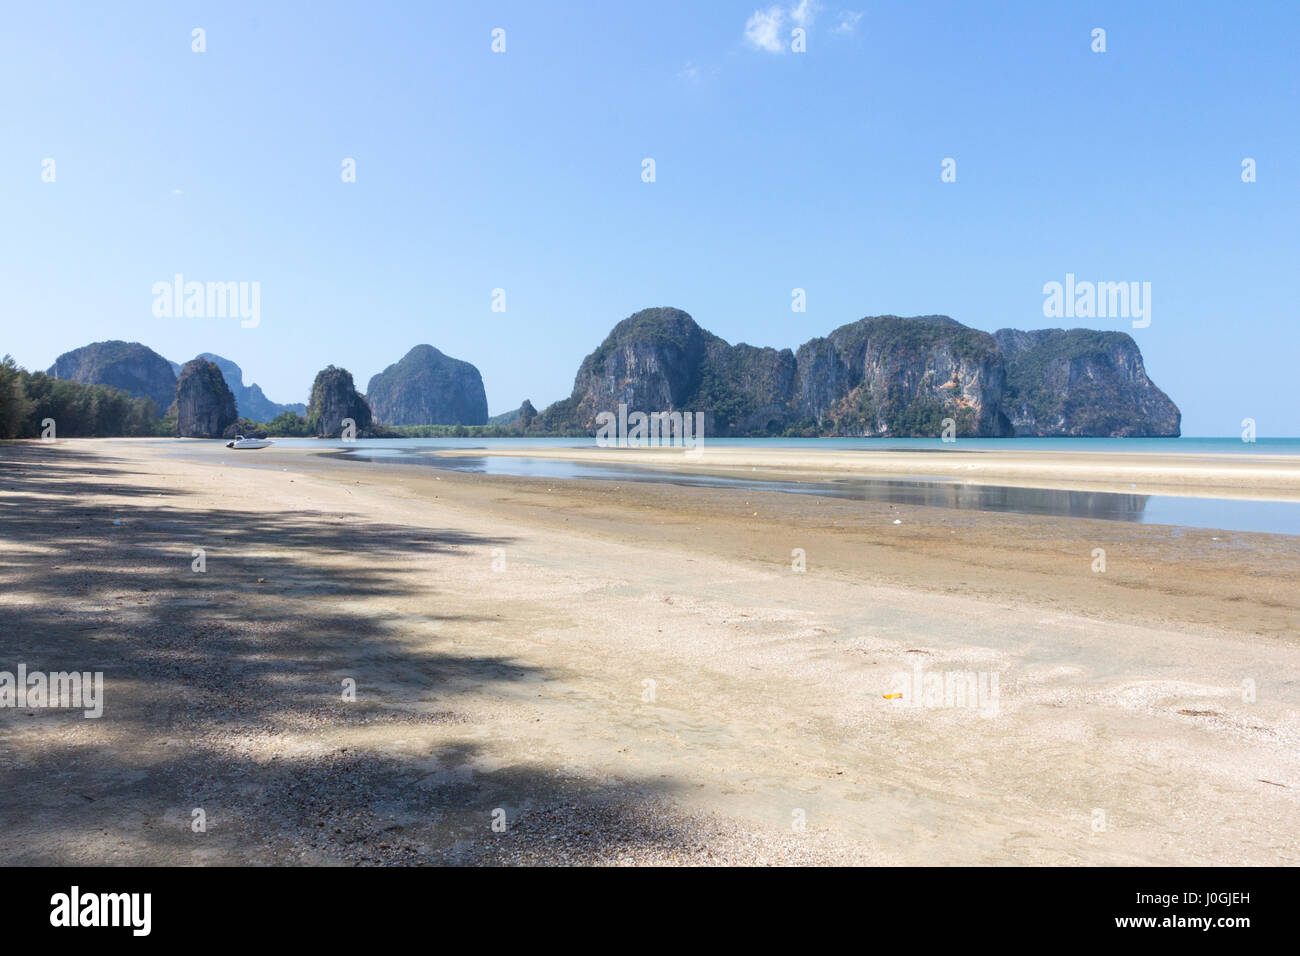 Boat on Rajamangala beach with limestone cliffs in the background,Trang province, Thailand Stock Photo